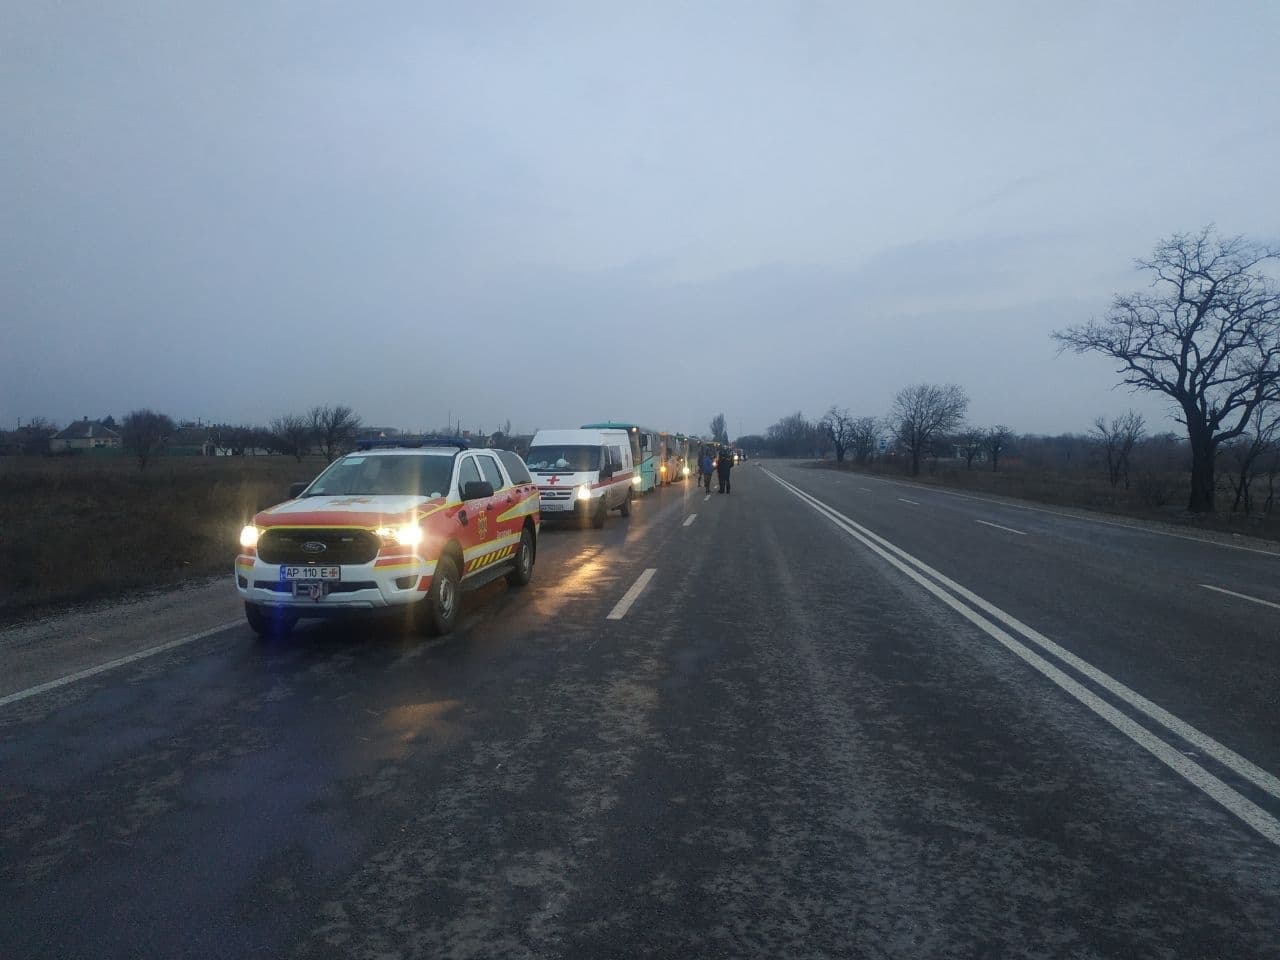 Defense Express / The evacuation column of 12 buses and 100 cars arrived in Zaporizhzhia city / Day 14th of Ukraine's Defense Against Russian Invasion (Live Updates)